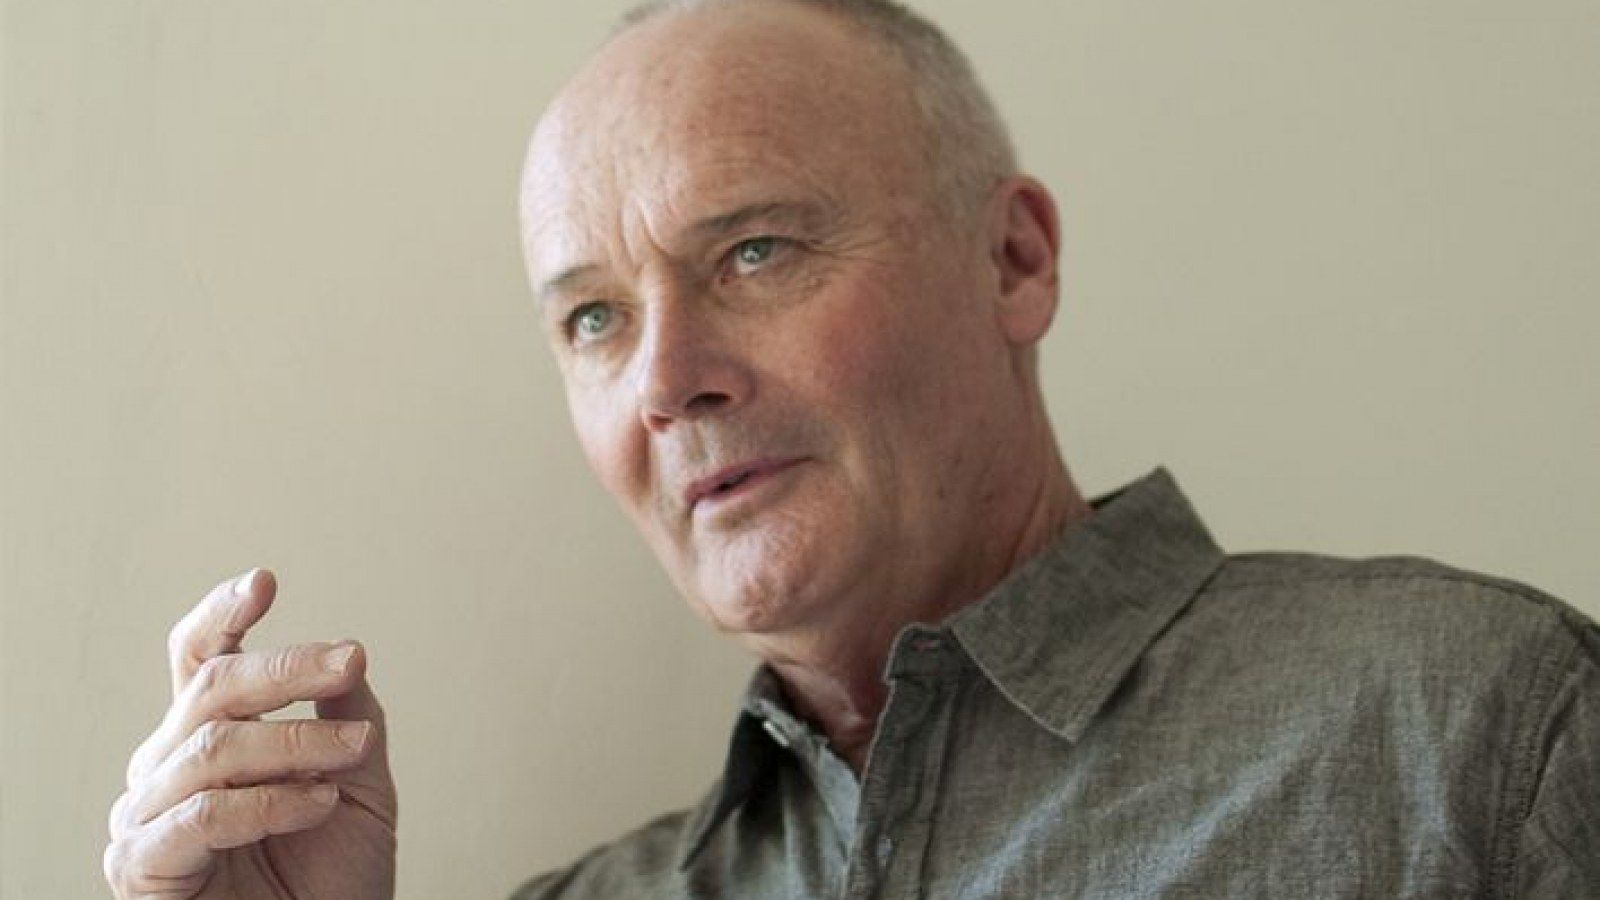 The Four Sides of Creed Bratton